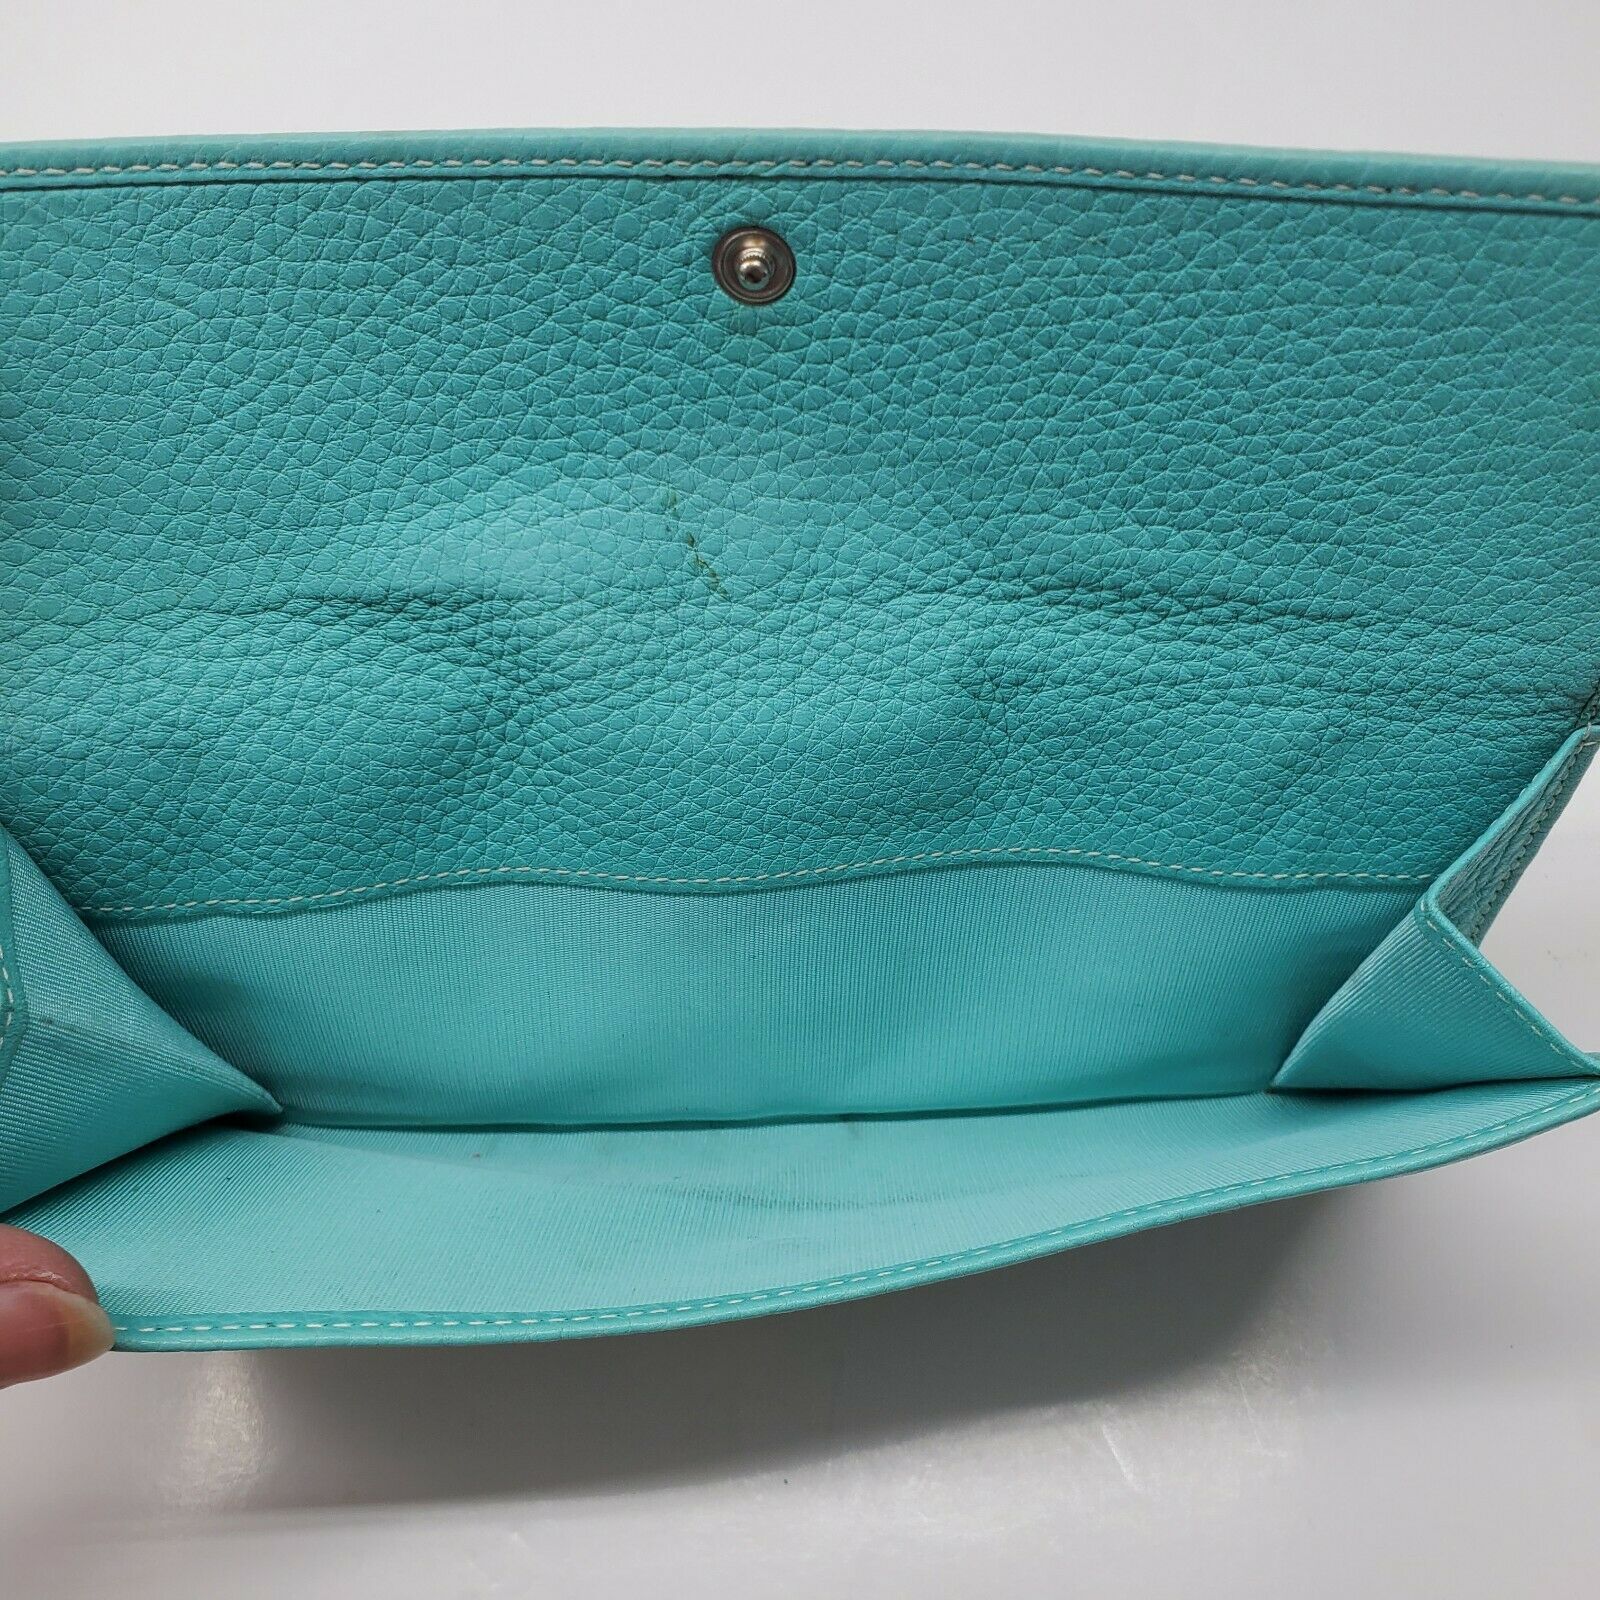 Tiffany & Co. Leather Wallet Teal Blue Turnlock Made Italy - Women&#39;s Bags & Handbags